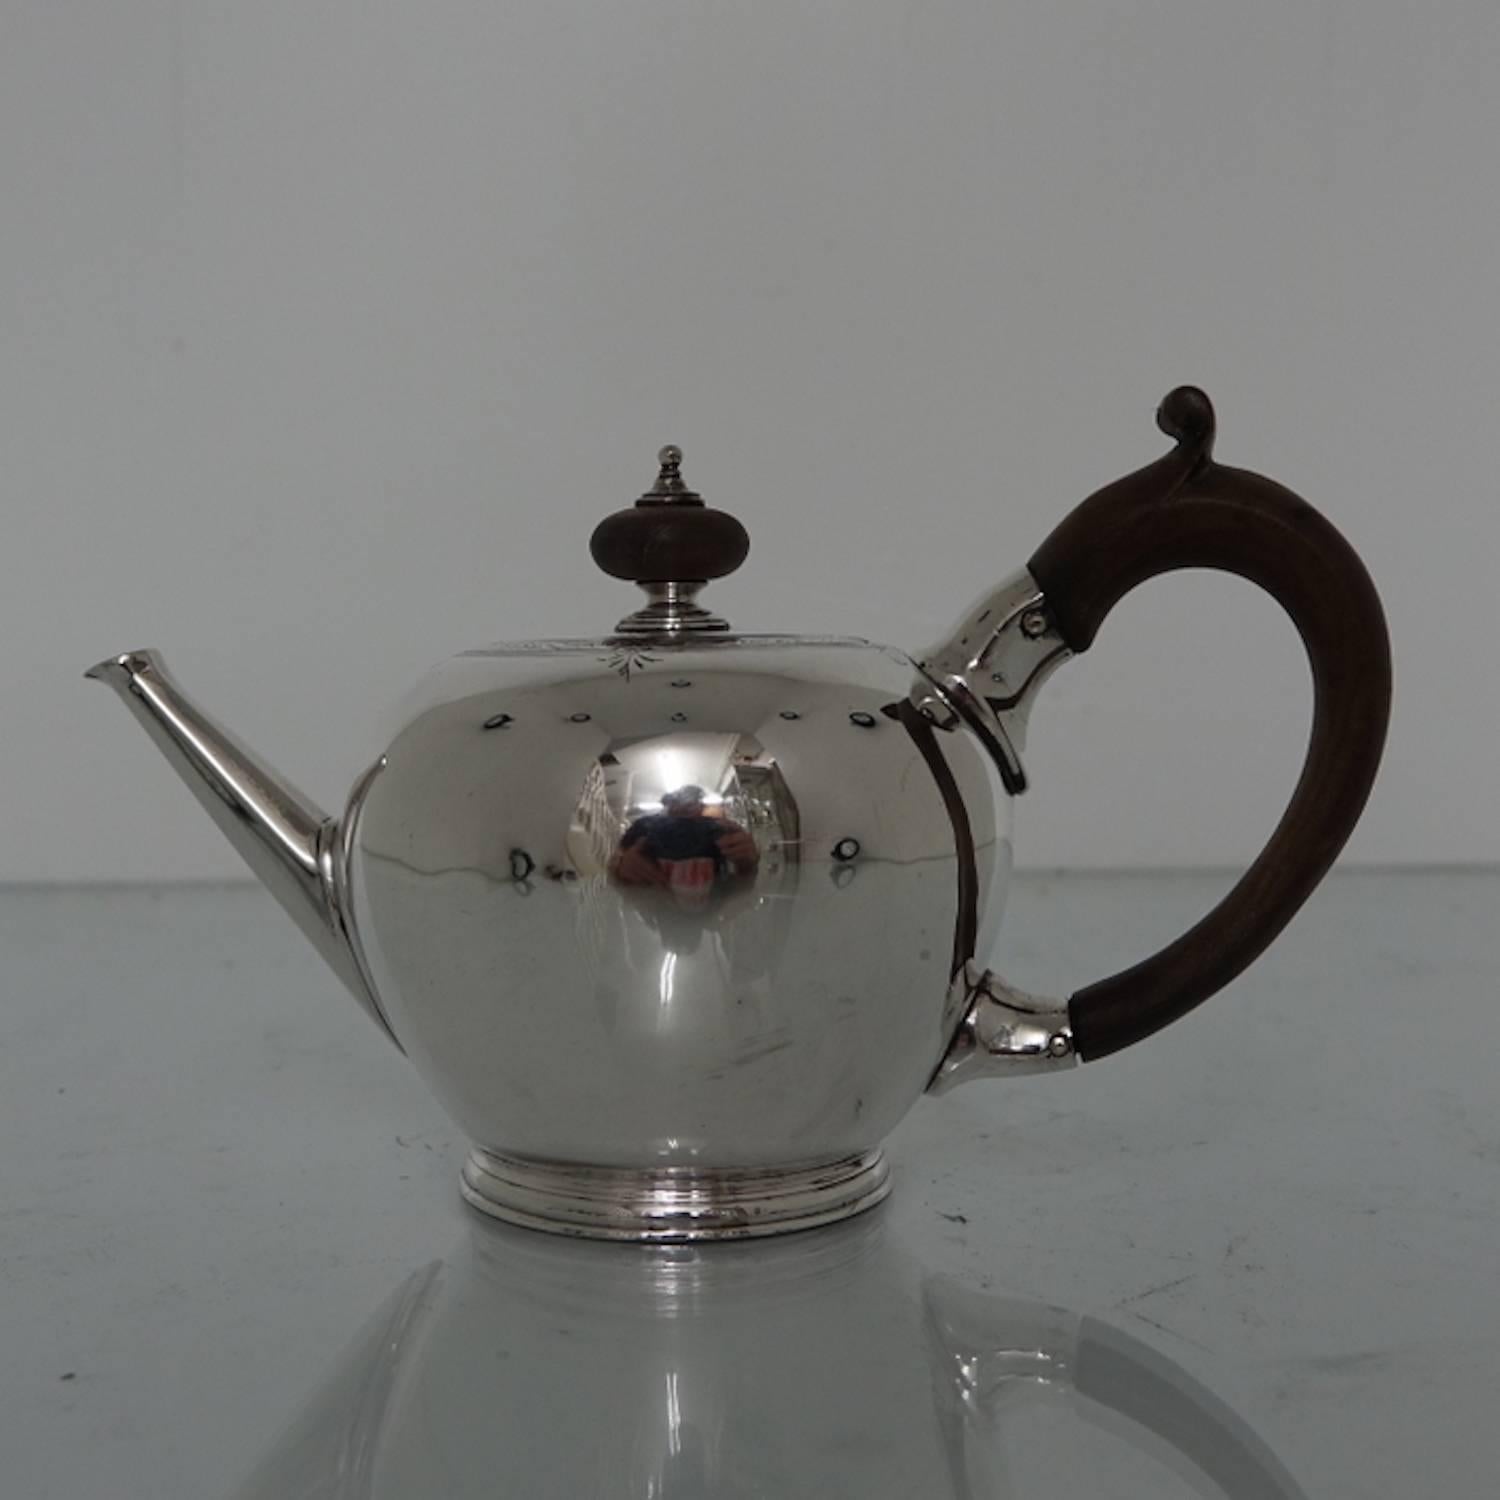 A very fine bullet teapot with a decorative single band of engraving running around the edge of the upper body. The lid of the teapot is hinged with an ebony knopped finial. The handle is also ebony and single scroll in design. The spout is